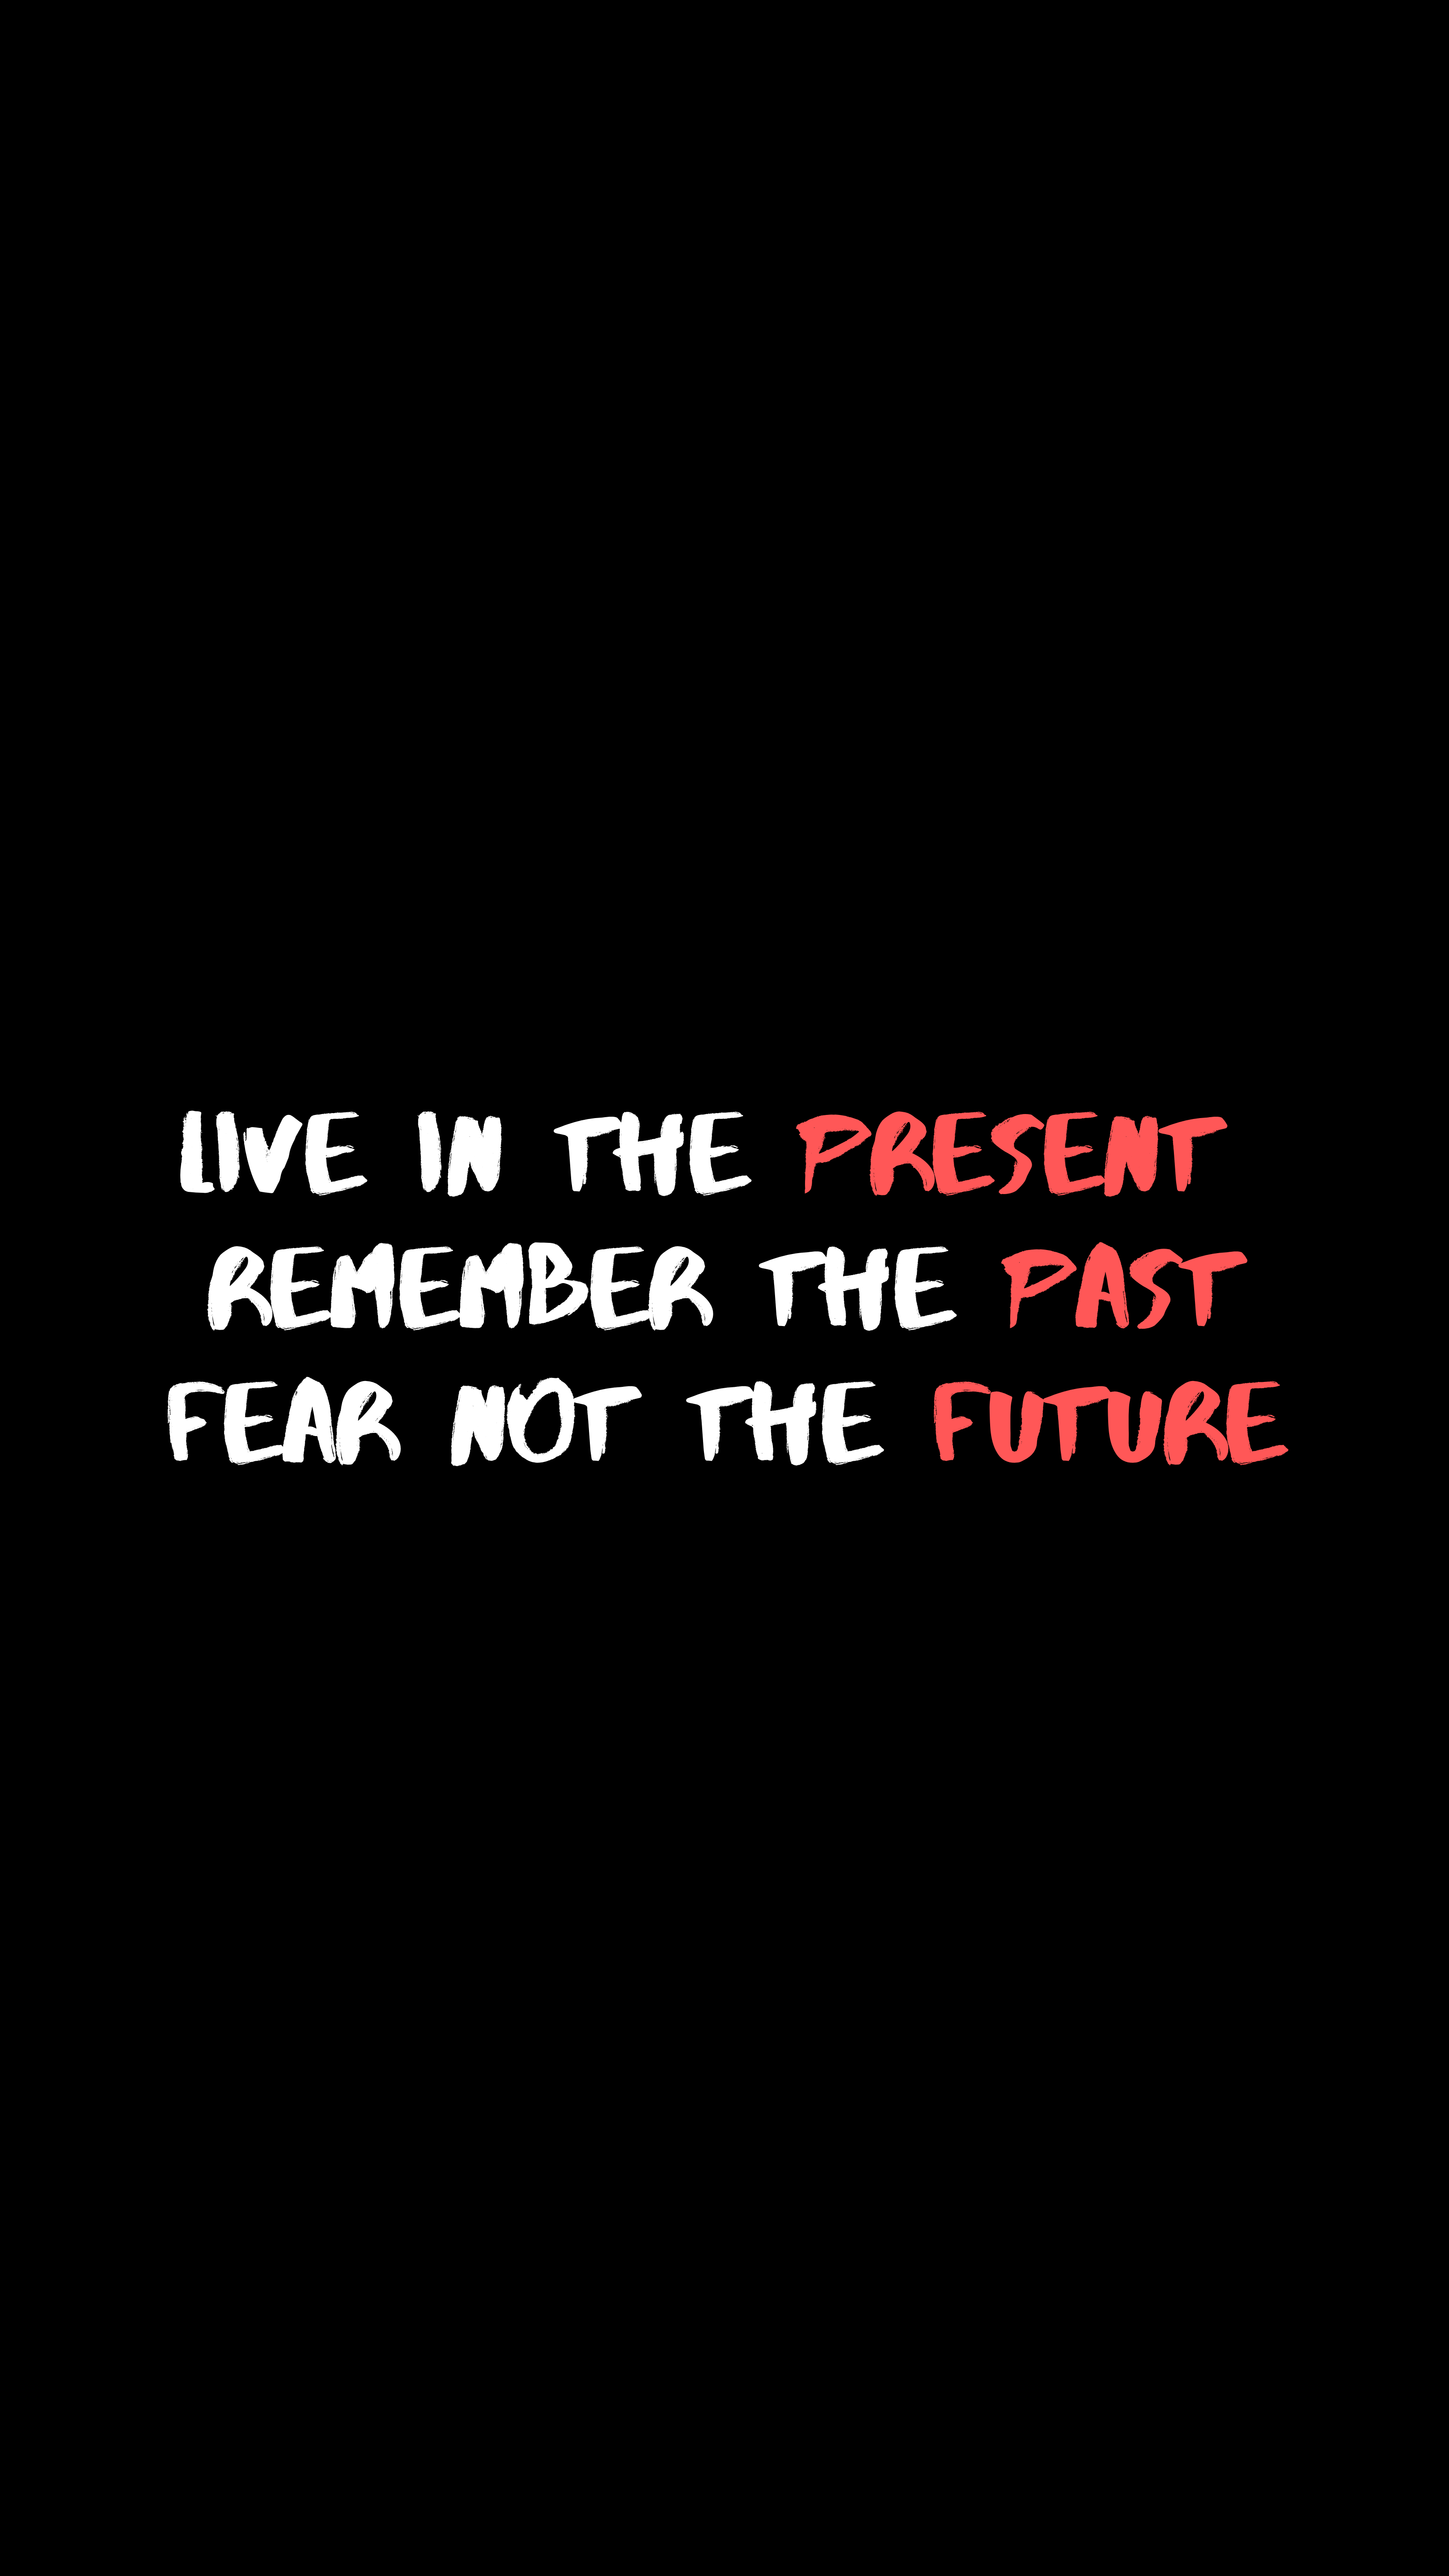 Free HD future, words, inspiration, present, motivation, quote, quotation, past